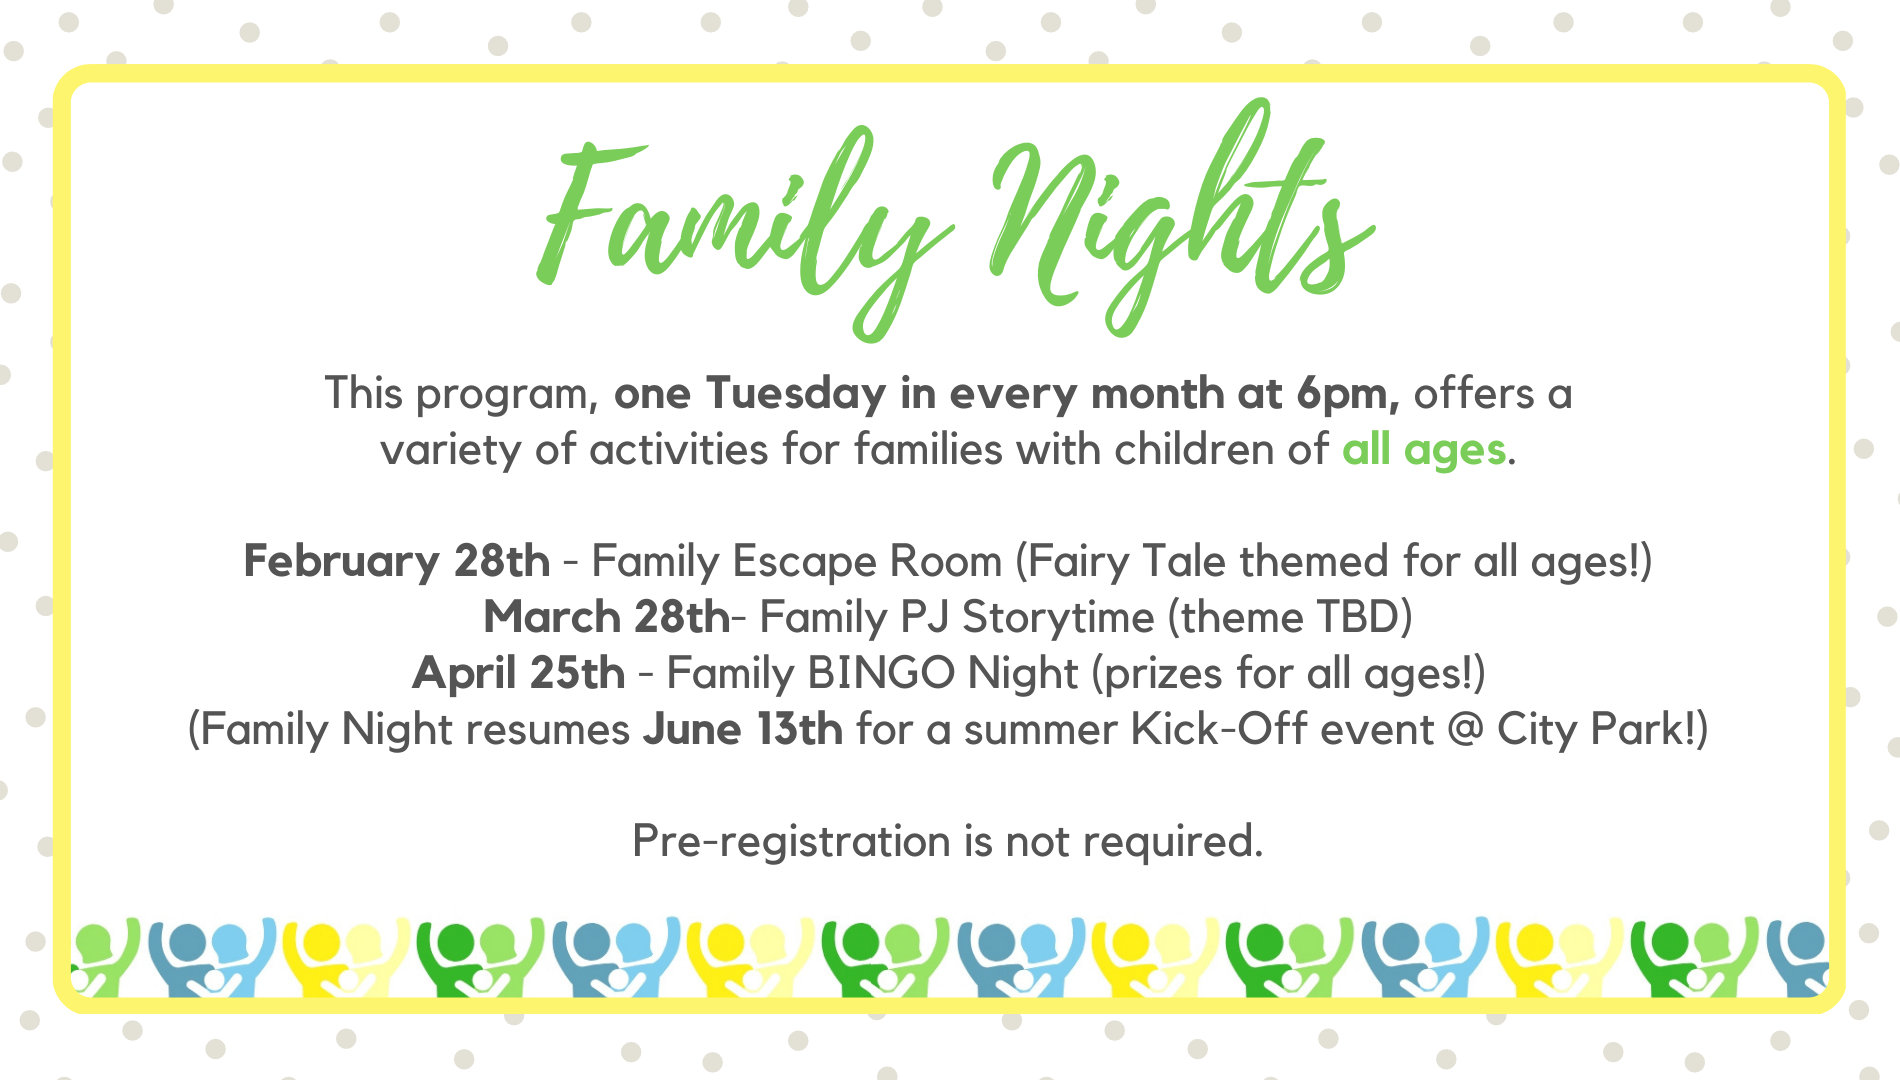 Family Night is one Tuesday a month at 6pm